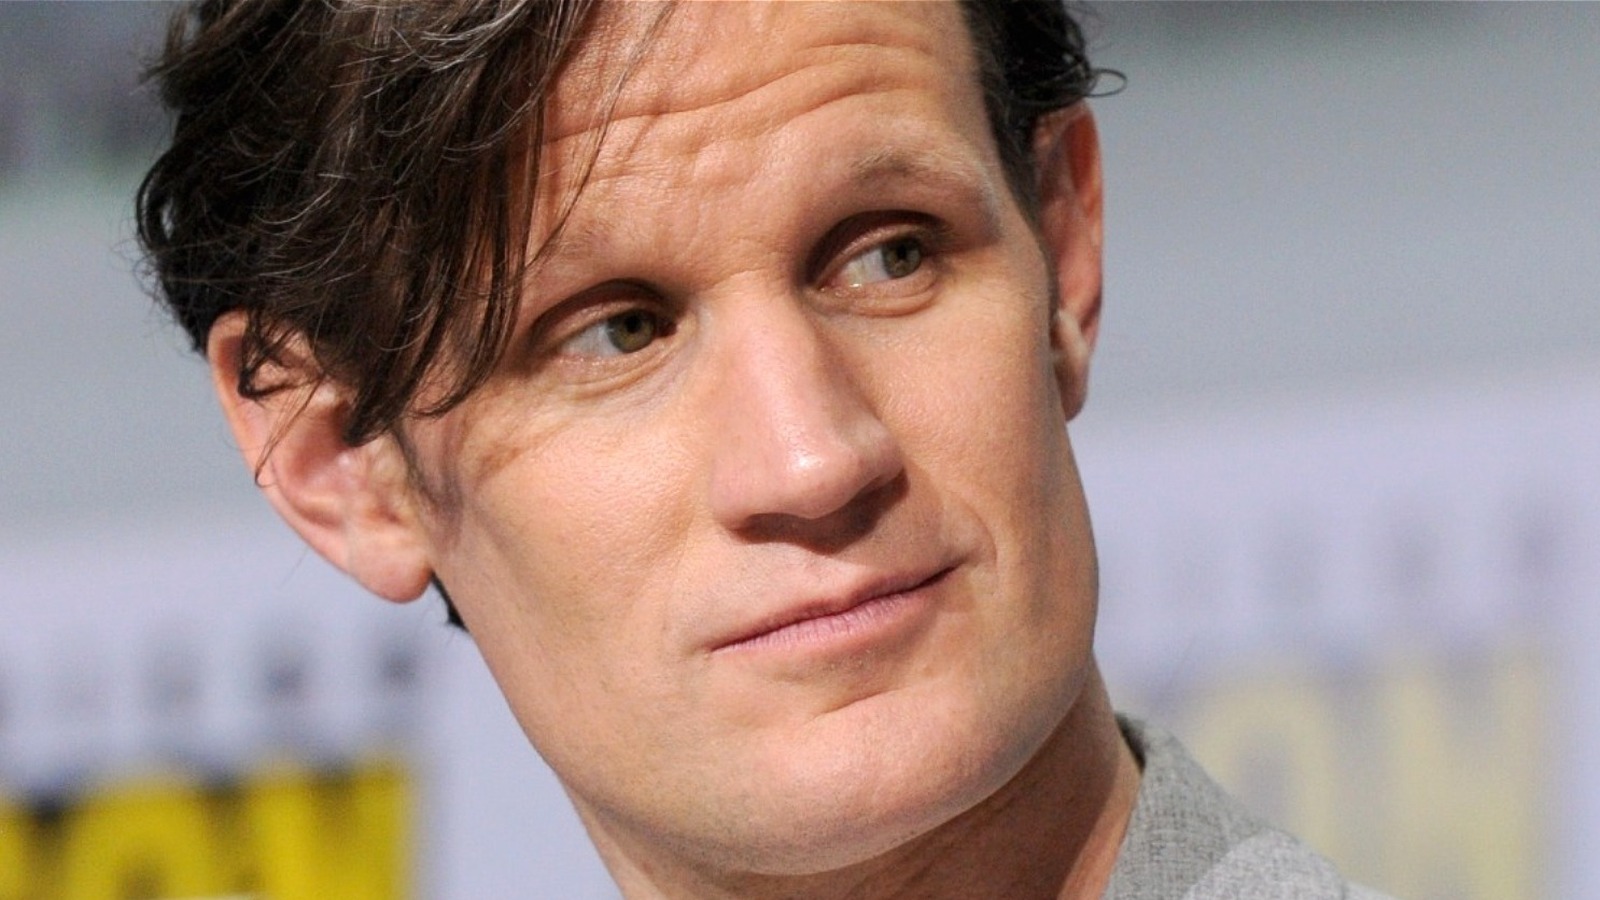 Matt Smith Worried That One Part of His House of the Dragon Costume Could Impair His Performance